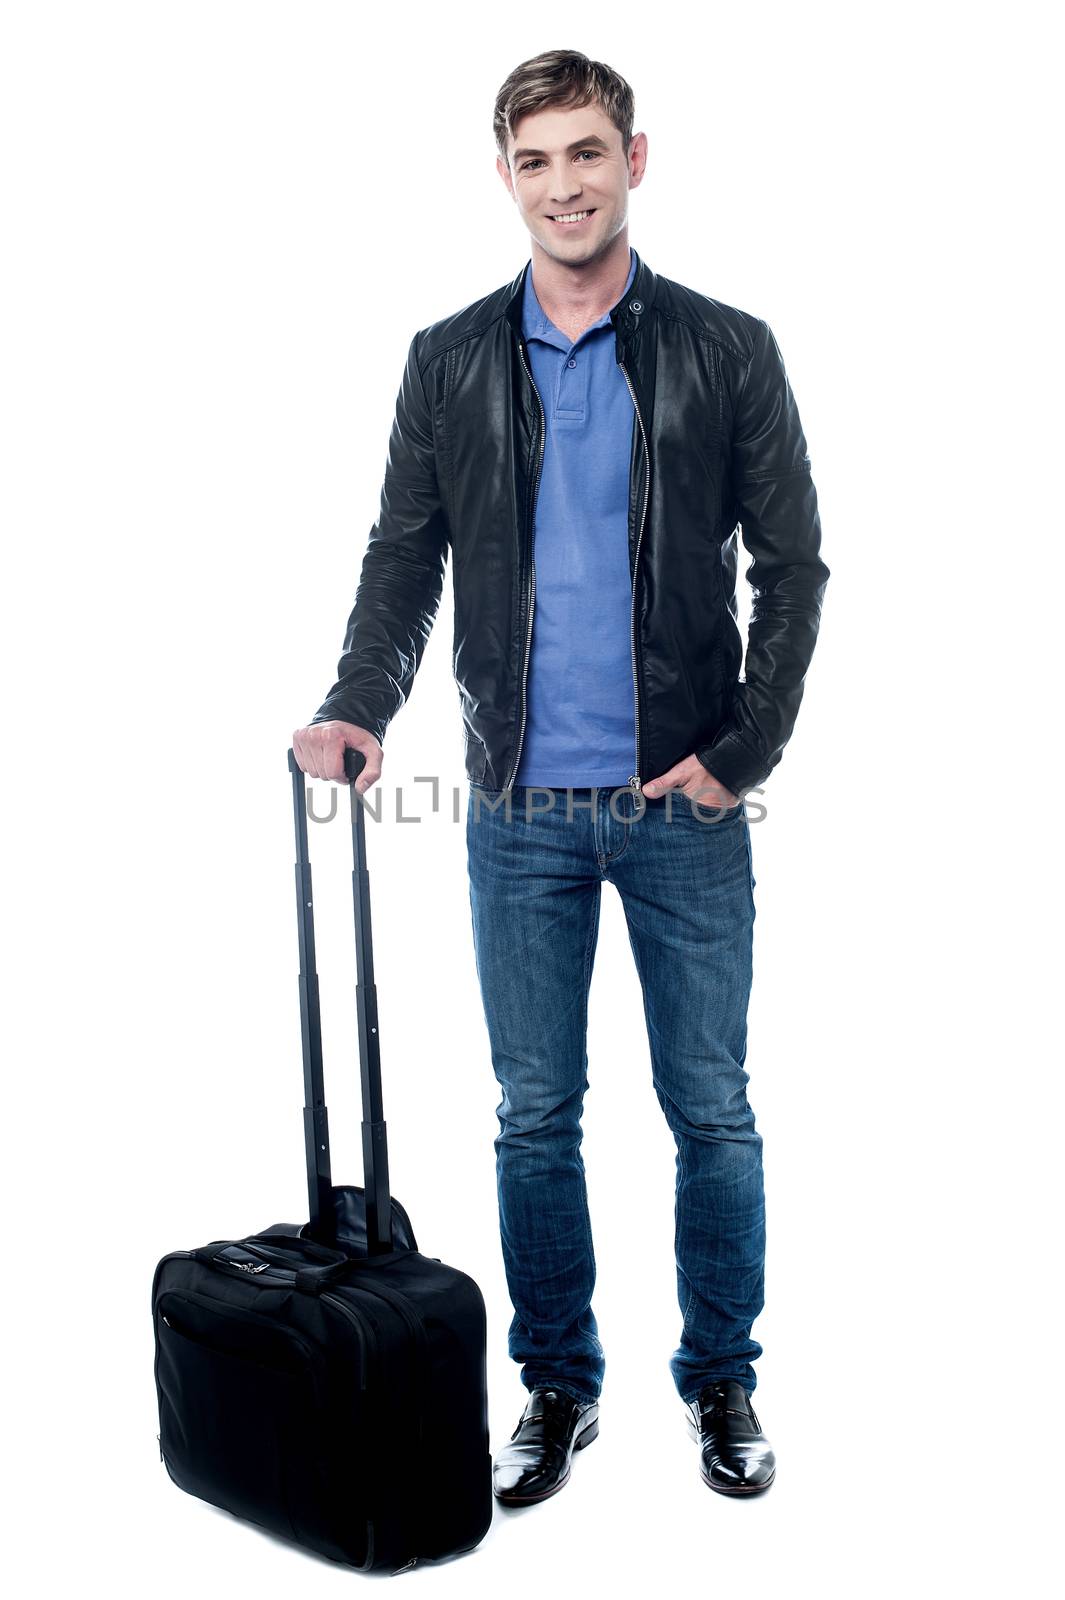 Smiling man carrying his luggage and hand in pocket